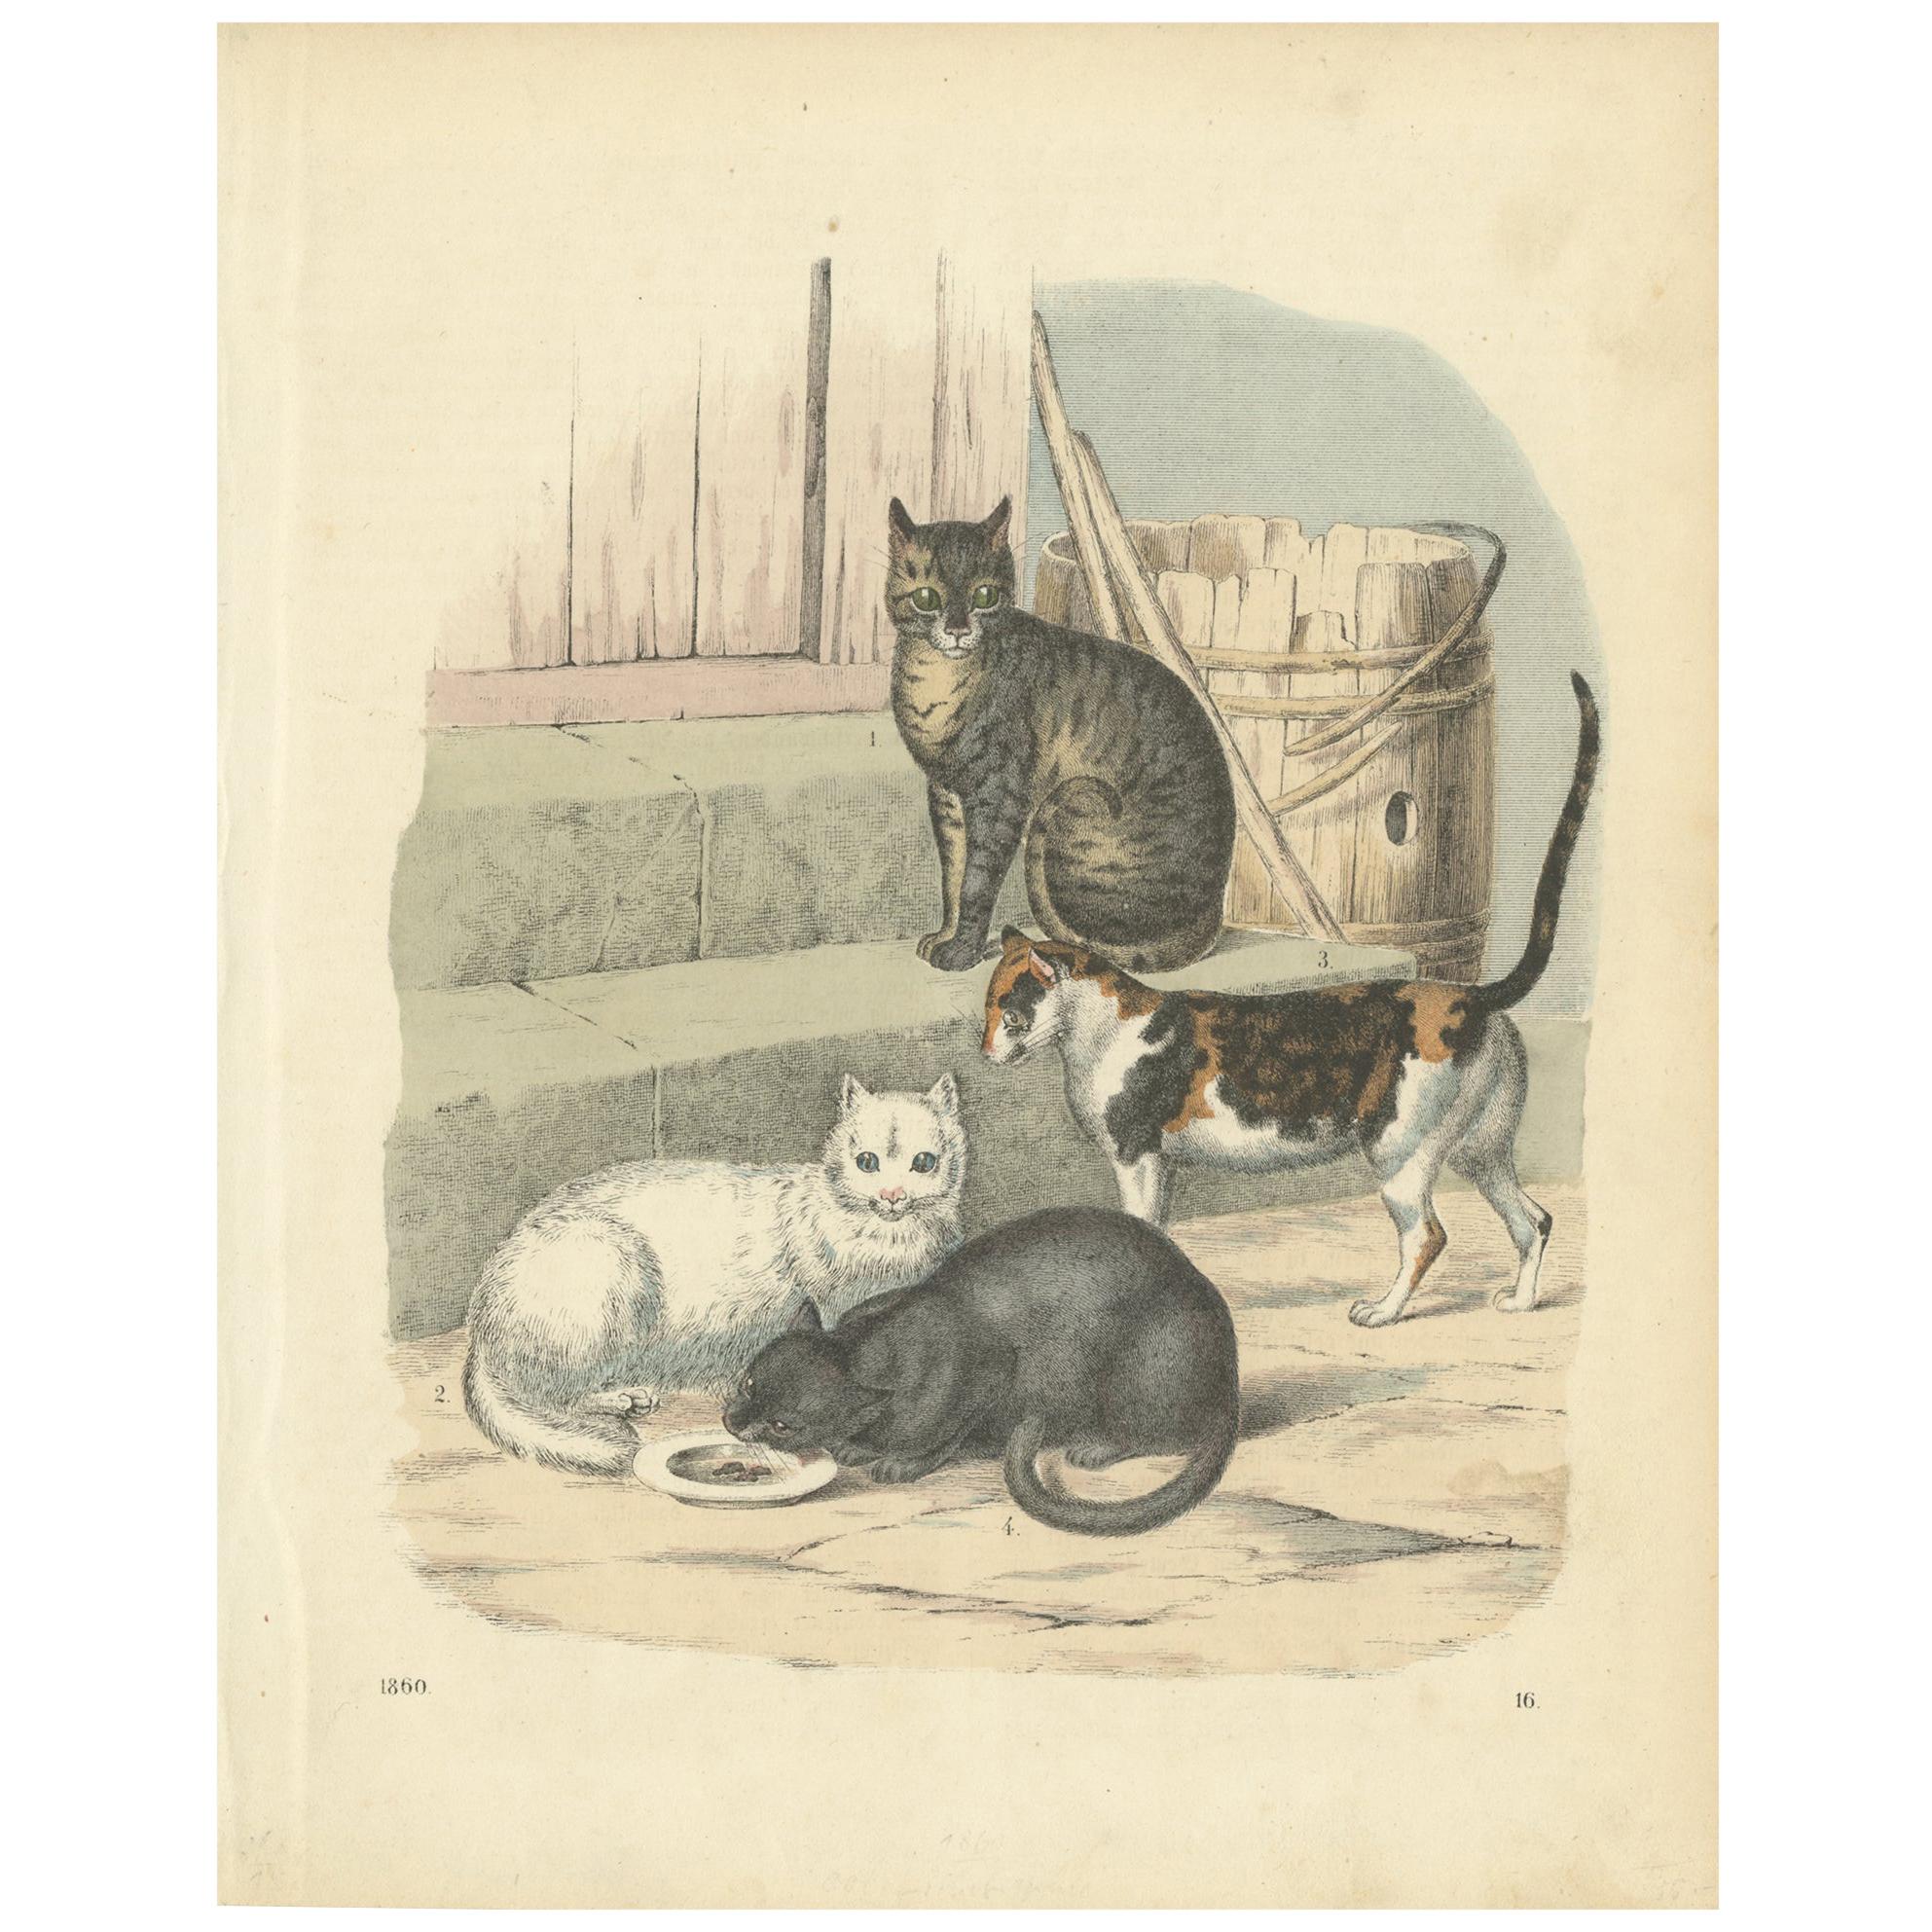 Antique Print of Cats by Hoffmann '1860'